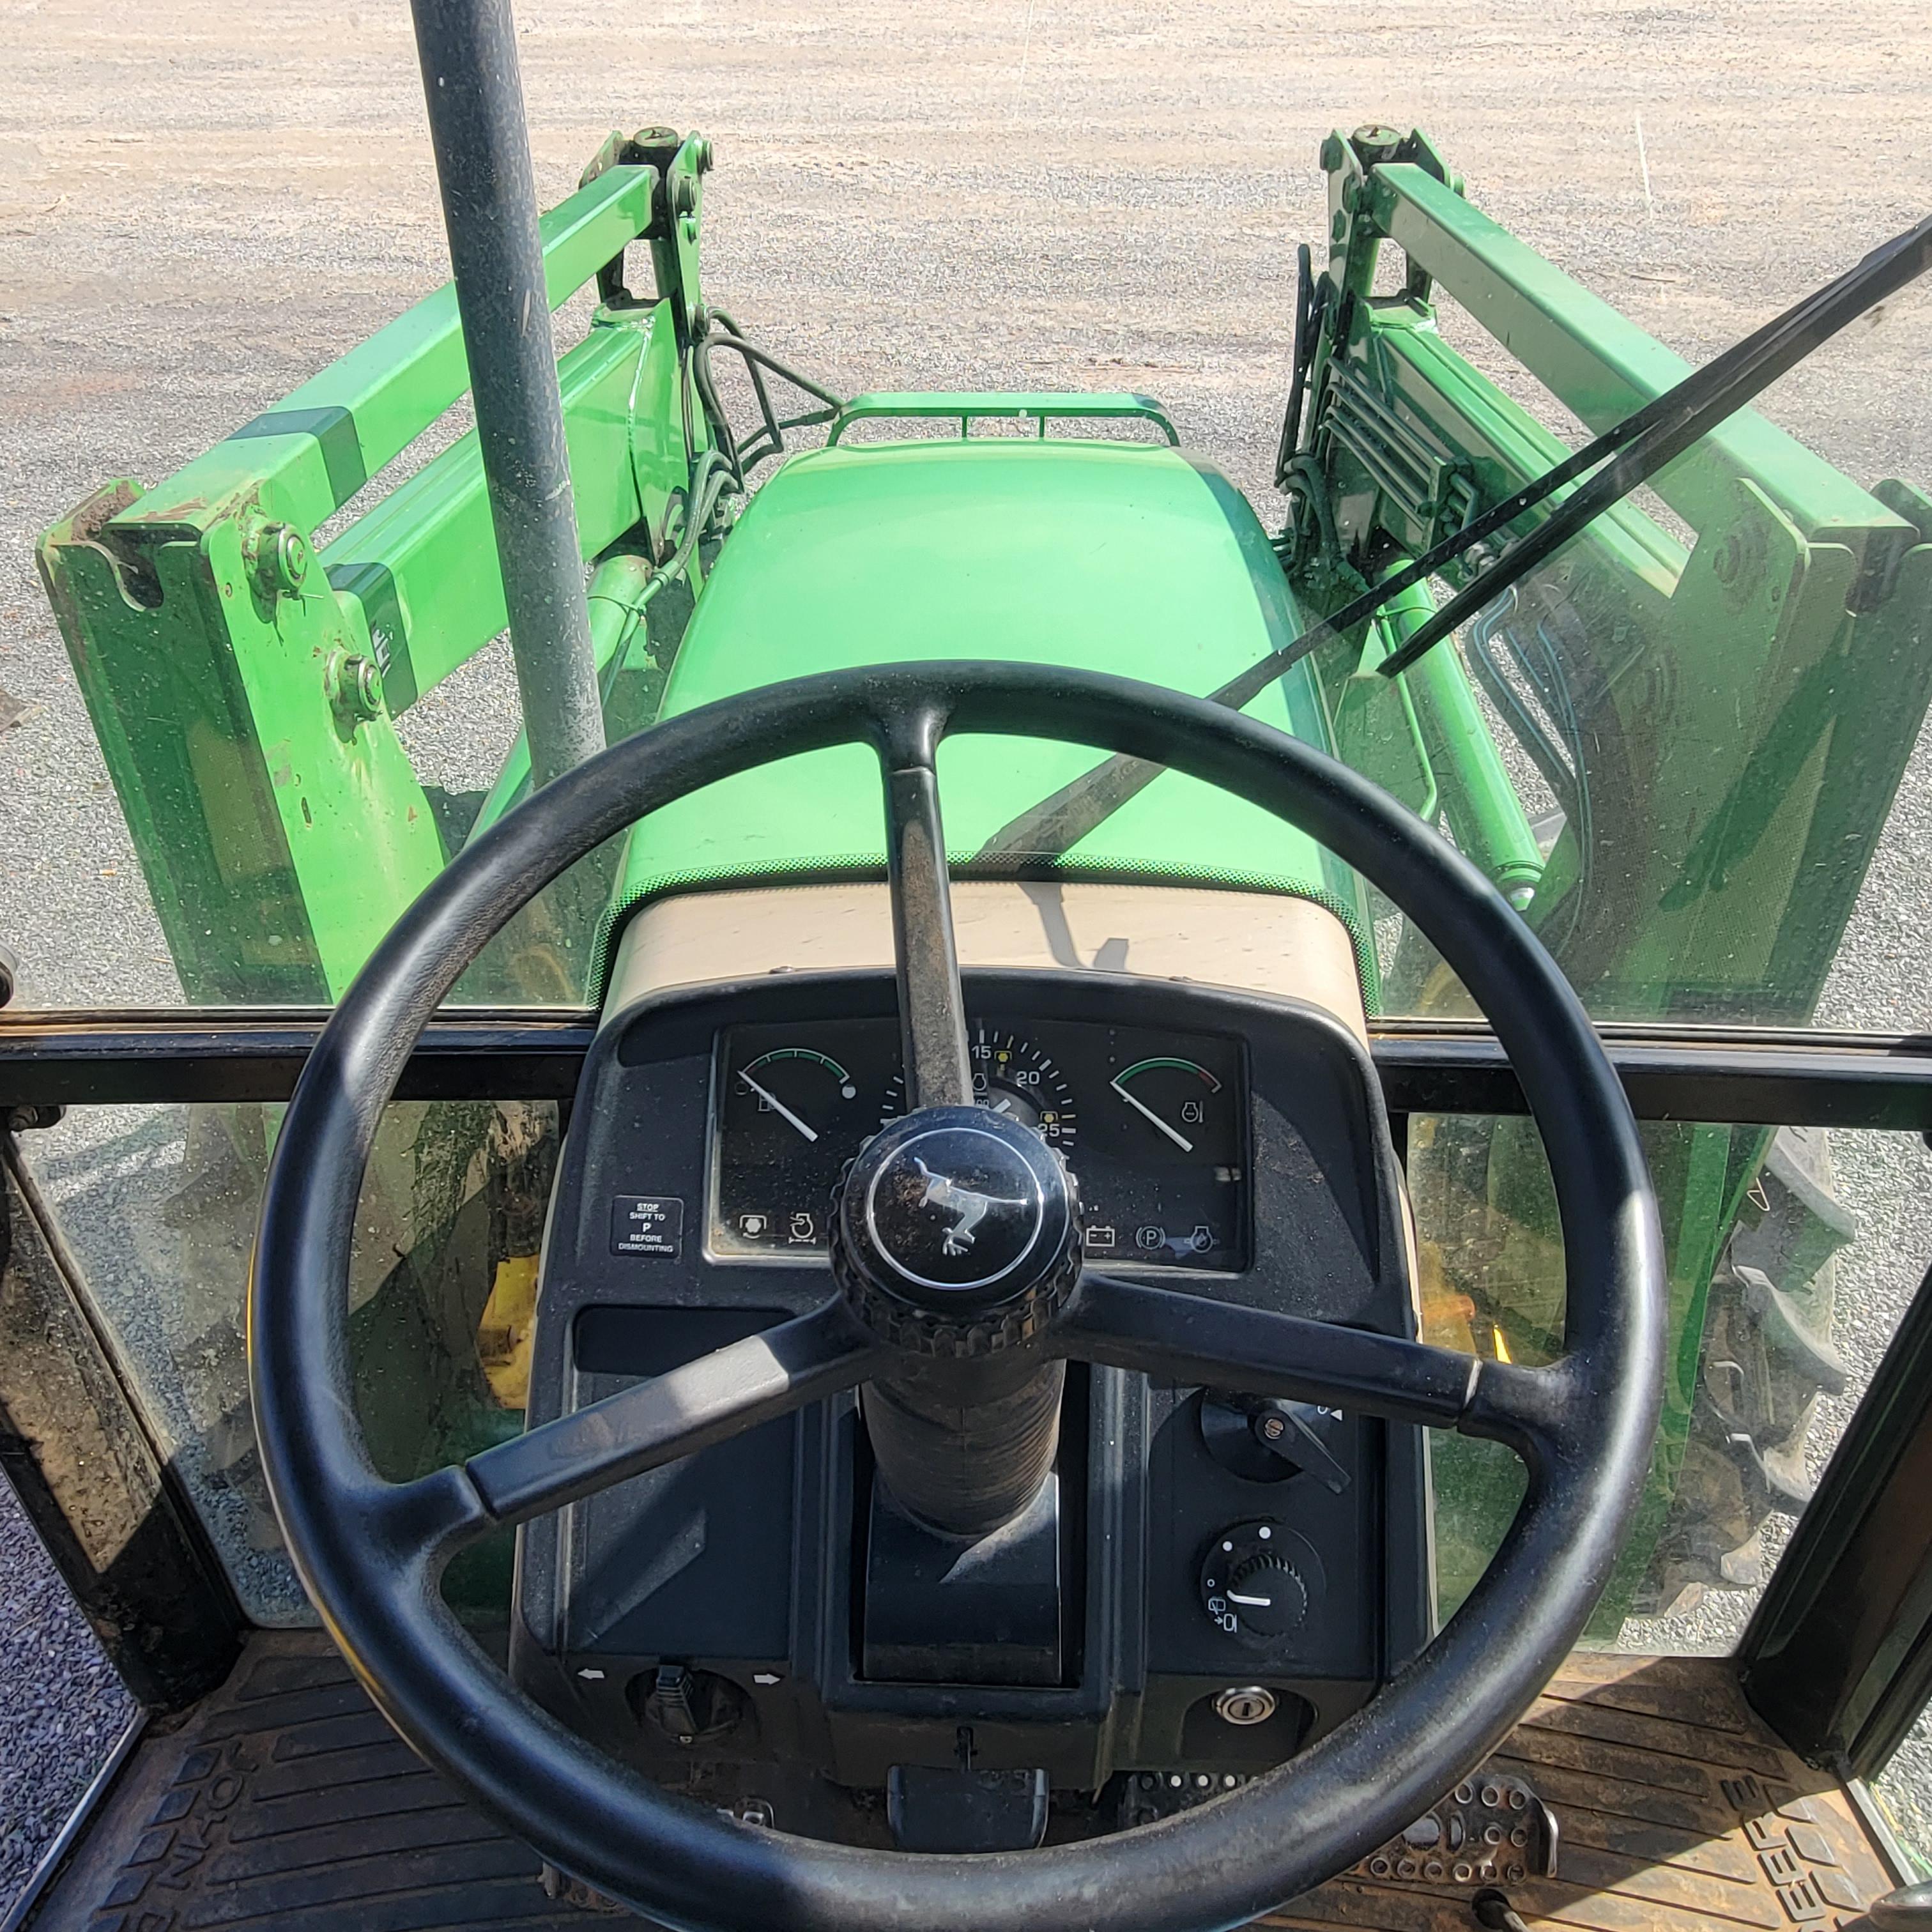 JOHN DEERE 5420 CAB TRACTOR W/ 541 LOADER - 4127 HOURS - (2 OPERATORS MANUALS IN OFFICE) - ONE OWNER